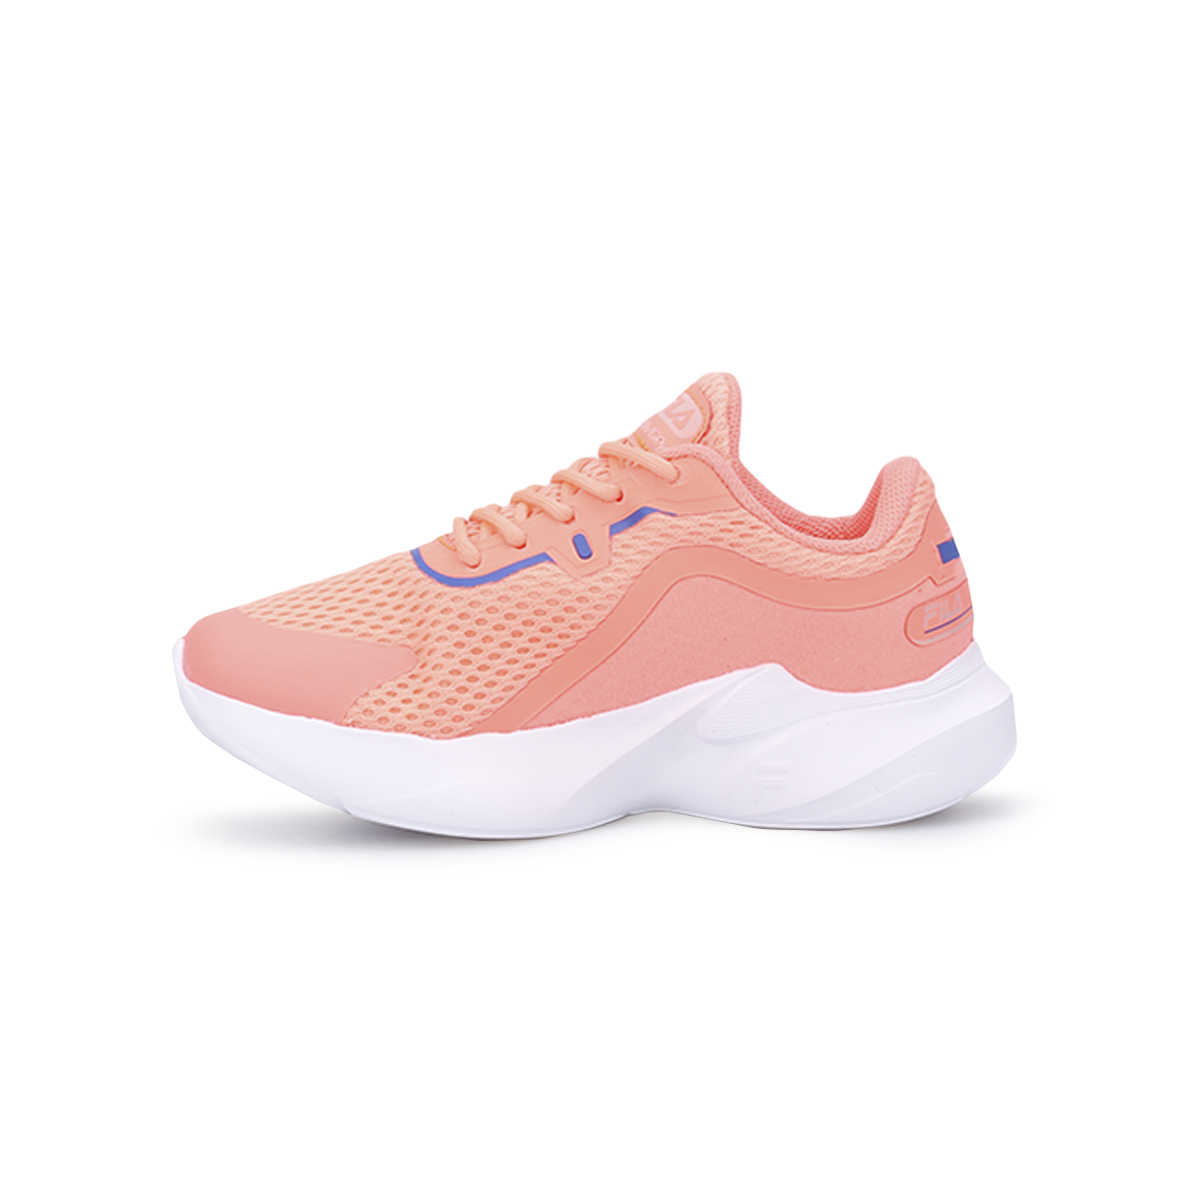 Zapatillas Fila Recovery,  image number null